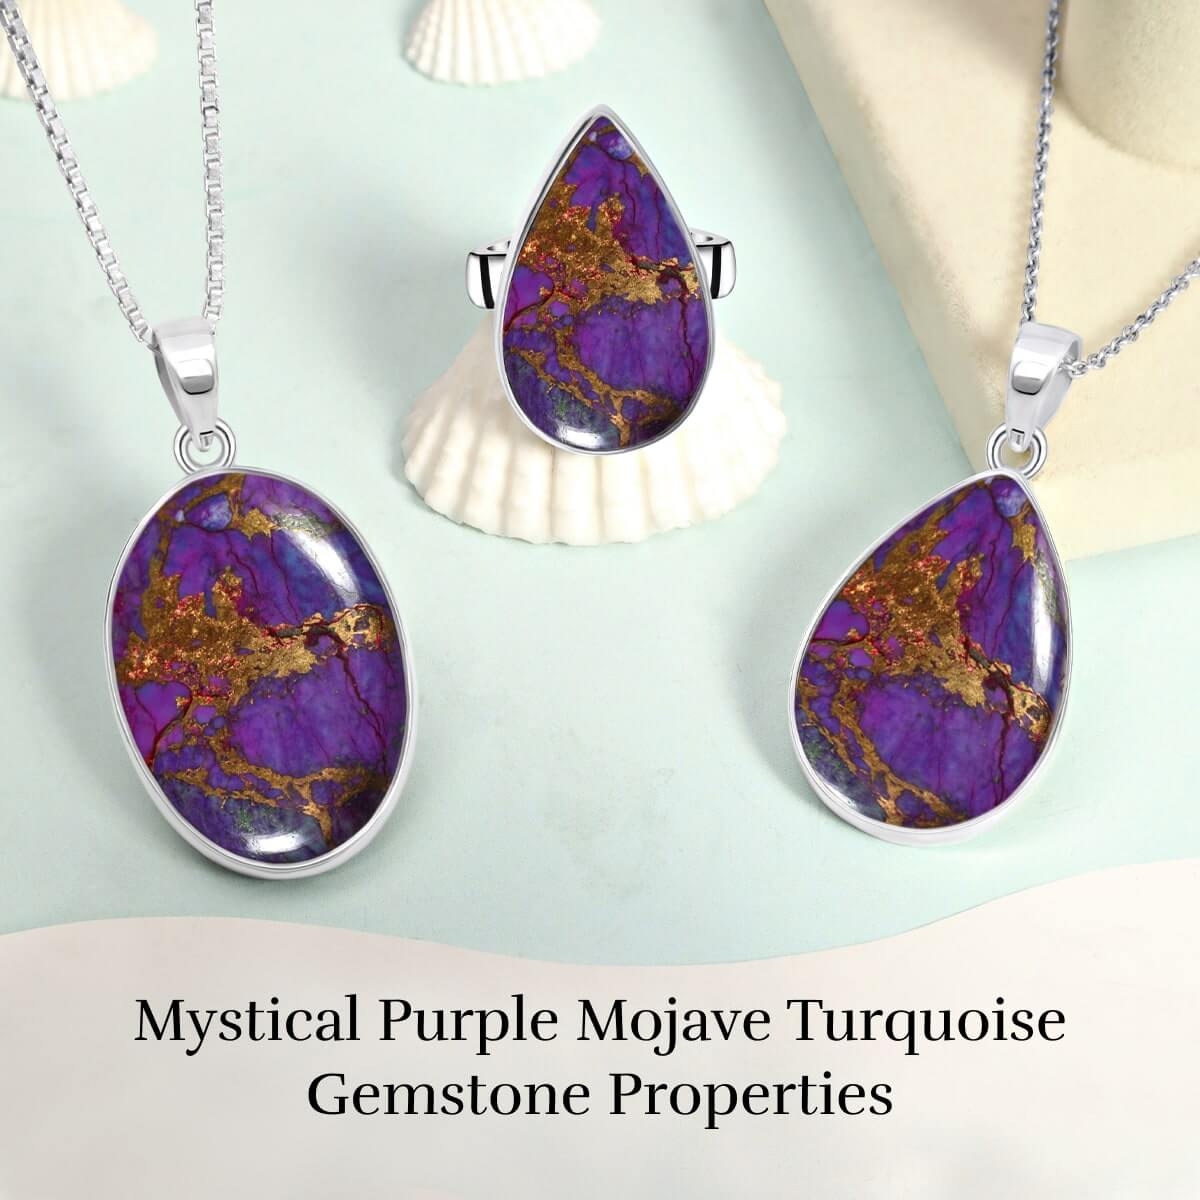 Physical Properties of Purple Mojave Turquoise stone